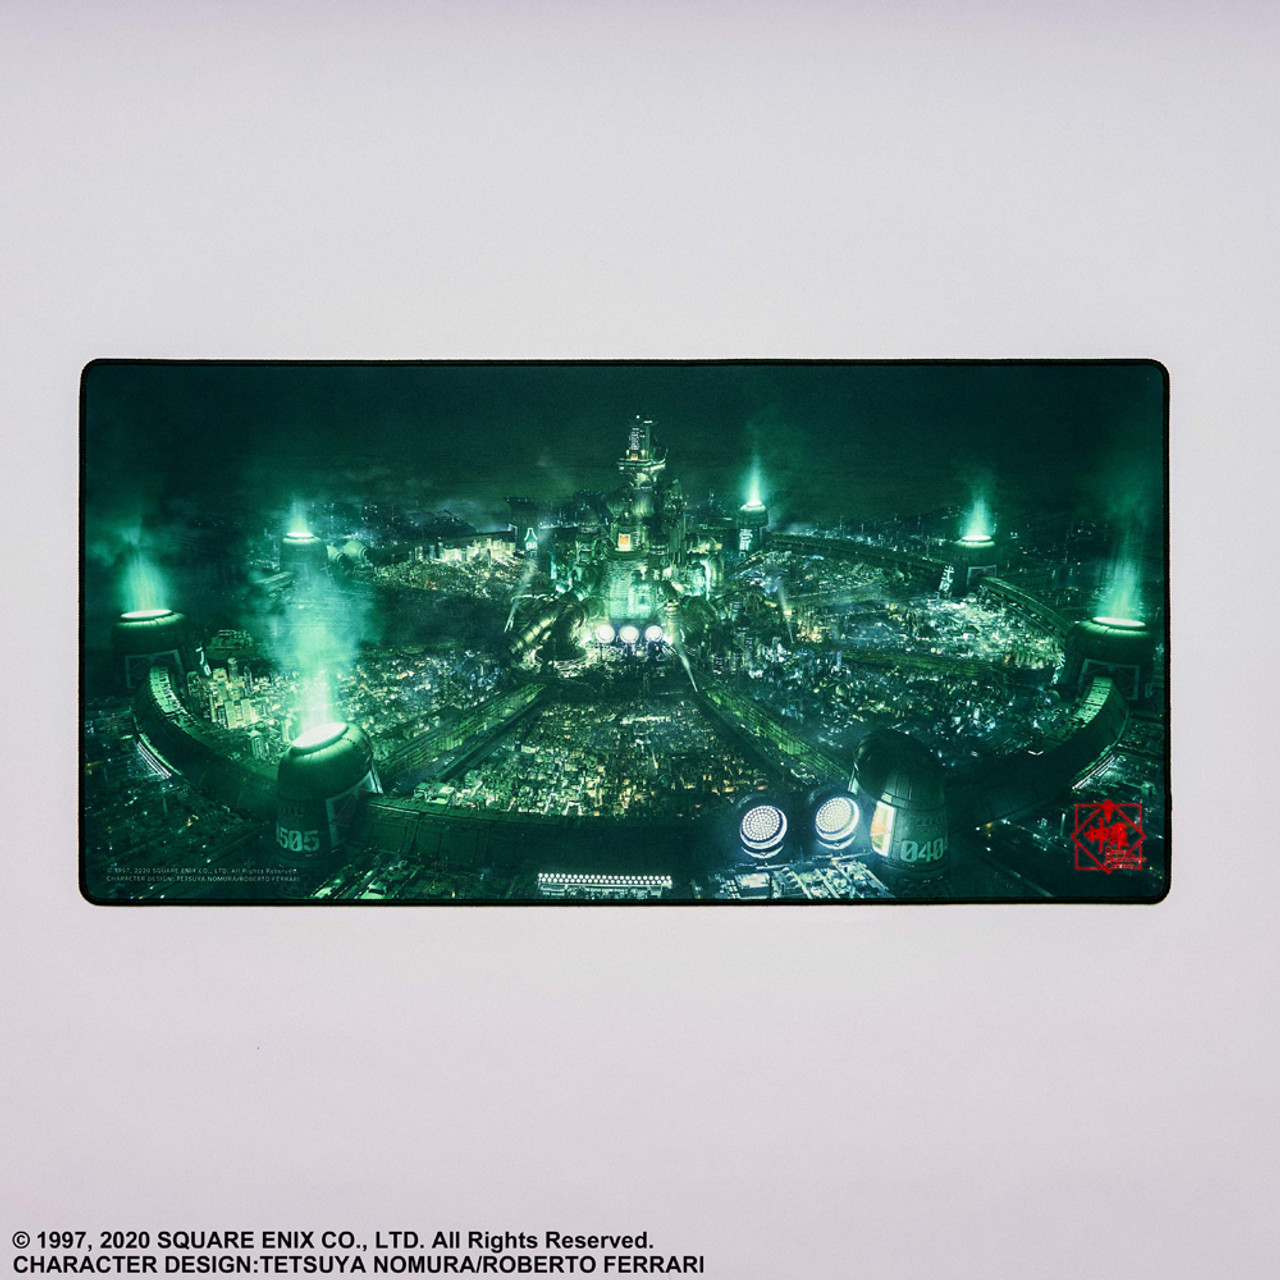 https://cdn11.bigcommerce.com/s-6rs11v9w2d/images/stencil/1280x1280/products/1159/12622/FF7R_Gaming_Mouse_Pad-MIDGAR_01R__07479.1675304123.jpg?c=1